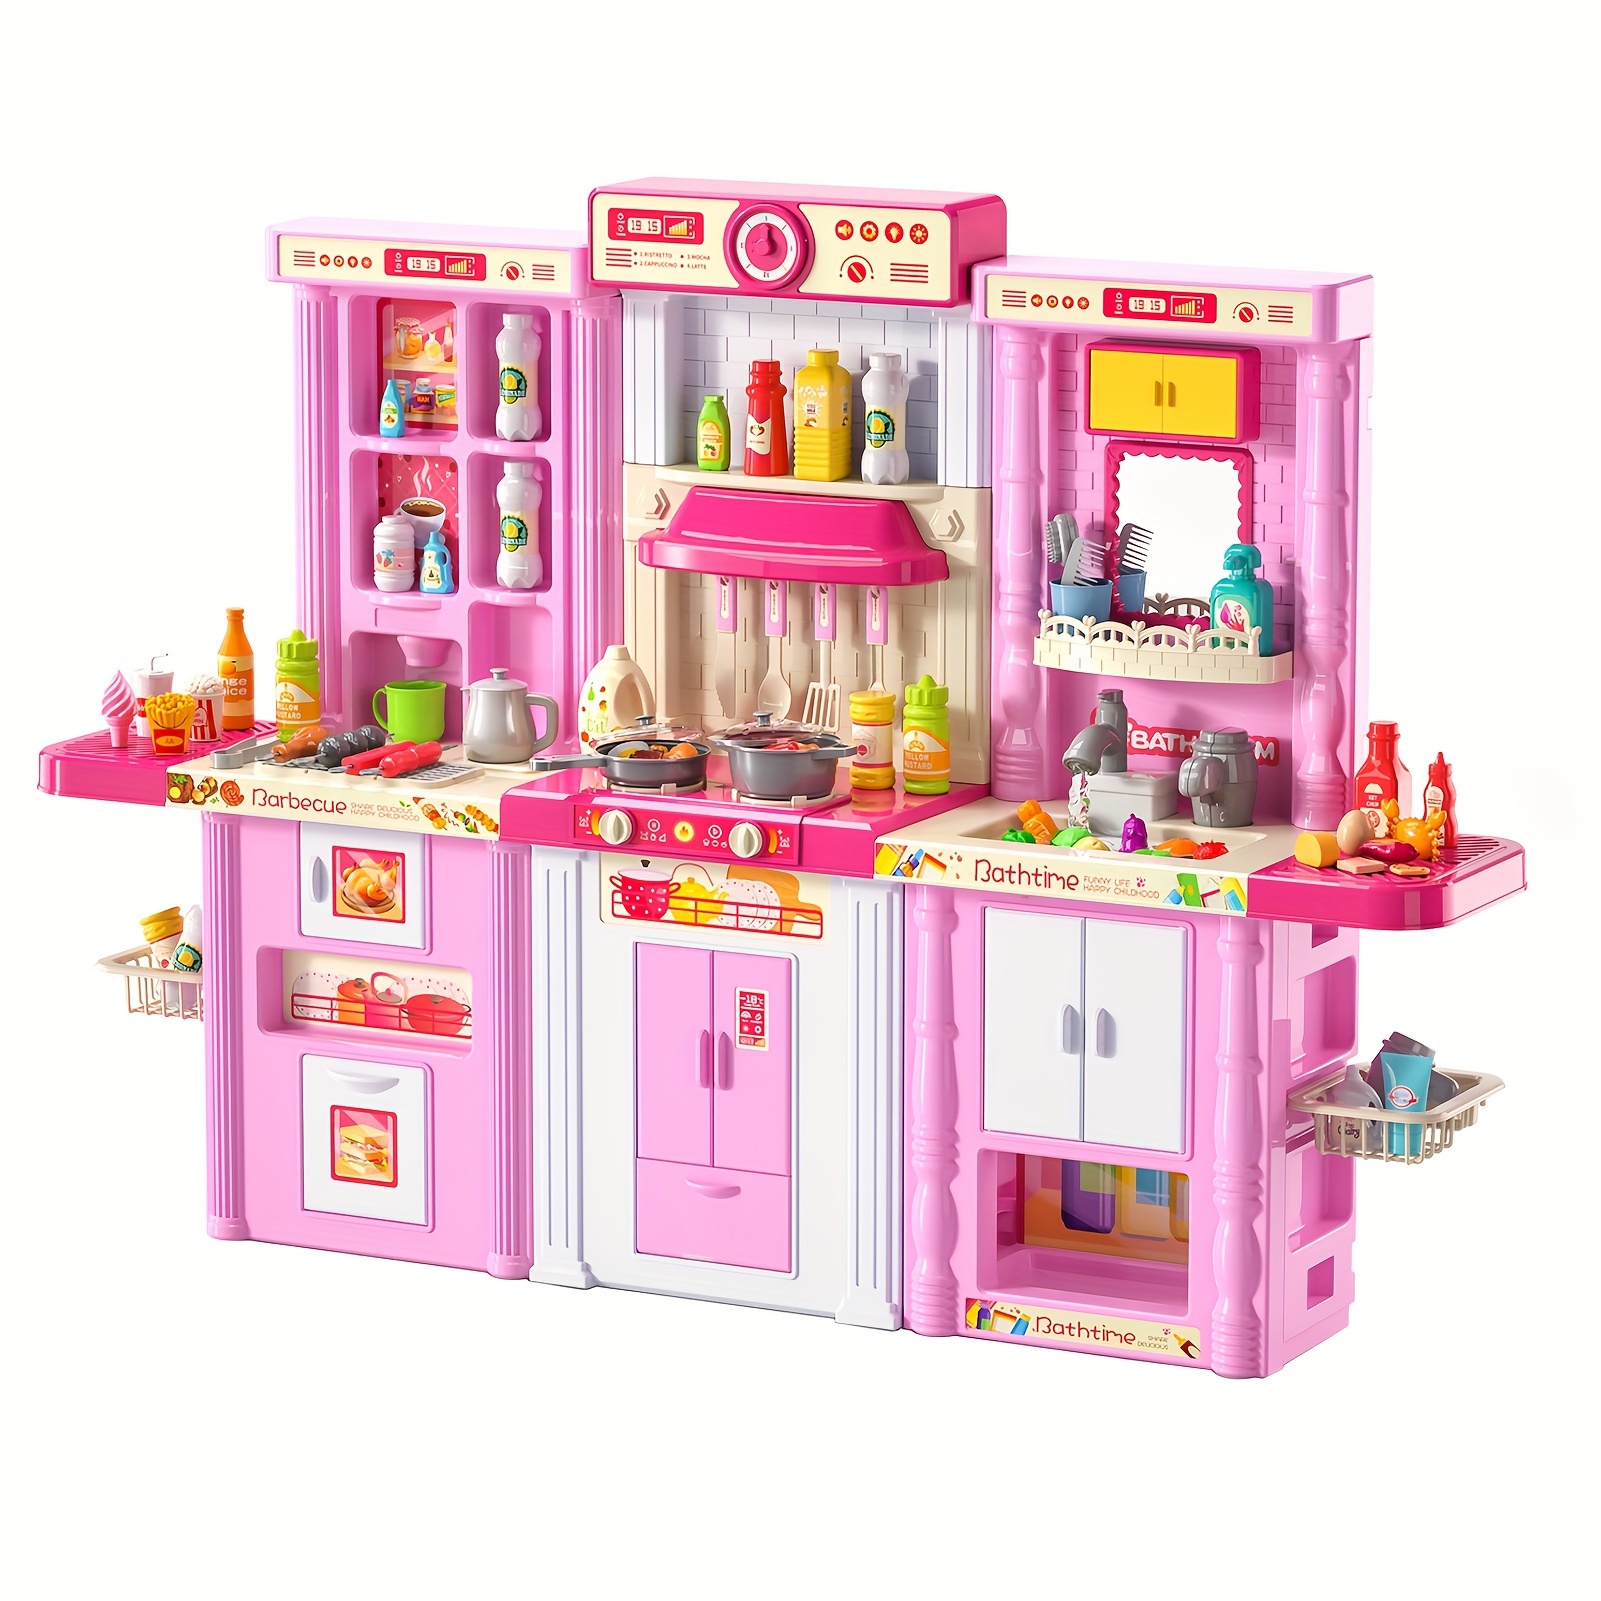 Fun Little Toys 62 Pcs Deluxe Kitchen - Pretend Play Accessory Toy